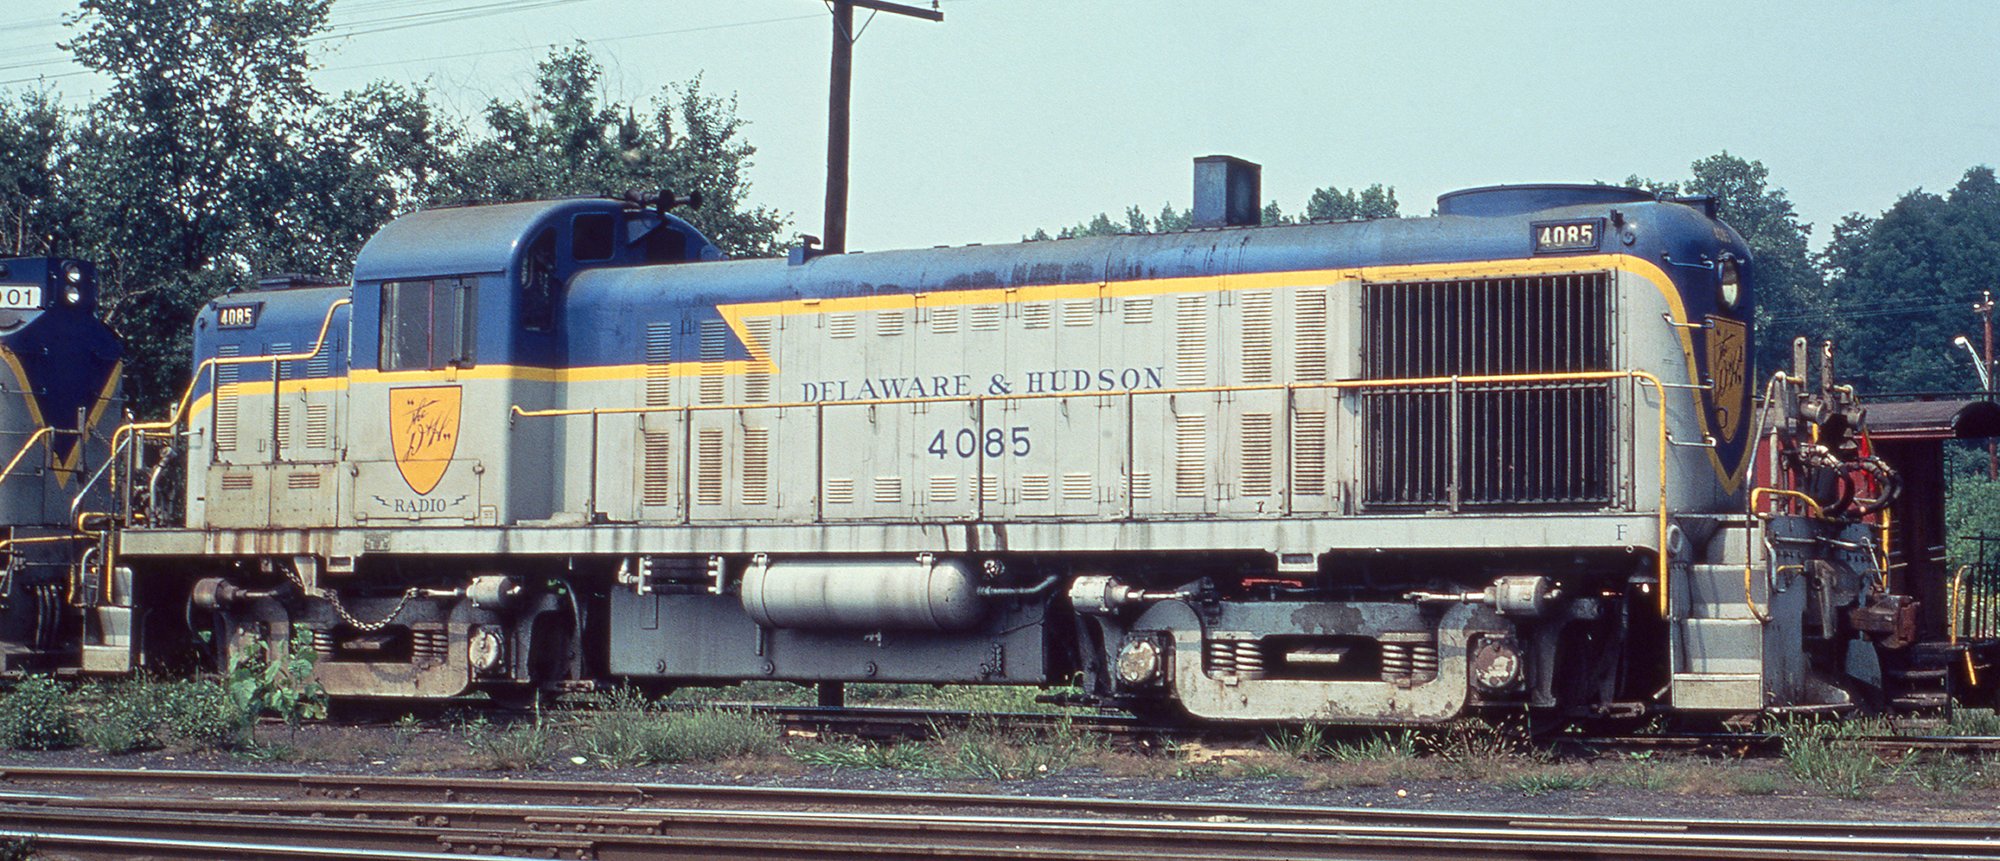   August 10, 1975 in Alplaus, NY - Charly’s Slides photo, The Garbely Publishing Company collection  